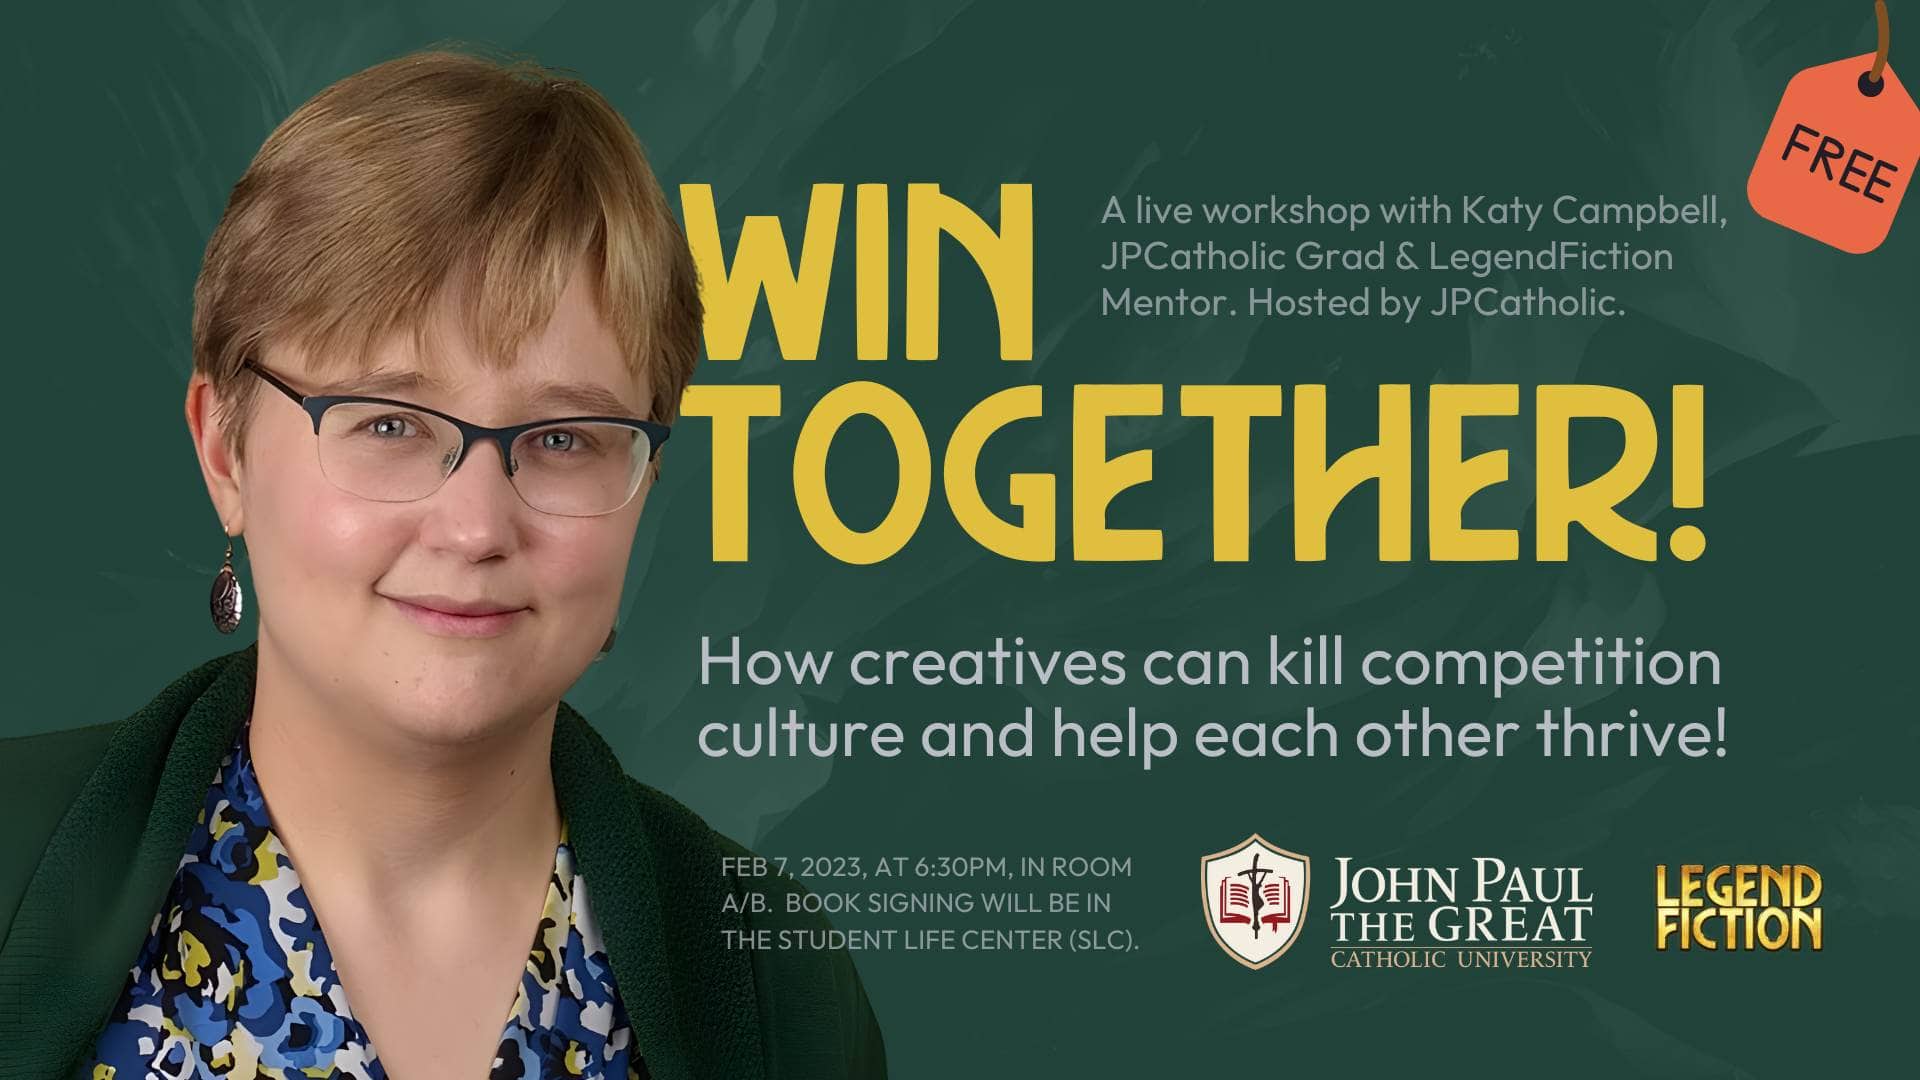 Live Workshop: How Creatives Can Kill Competition Culture and Help Each Other Thrive